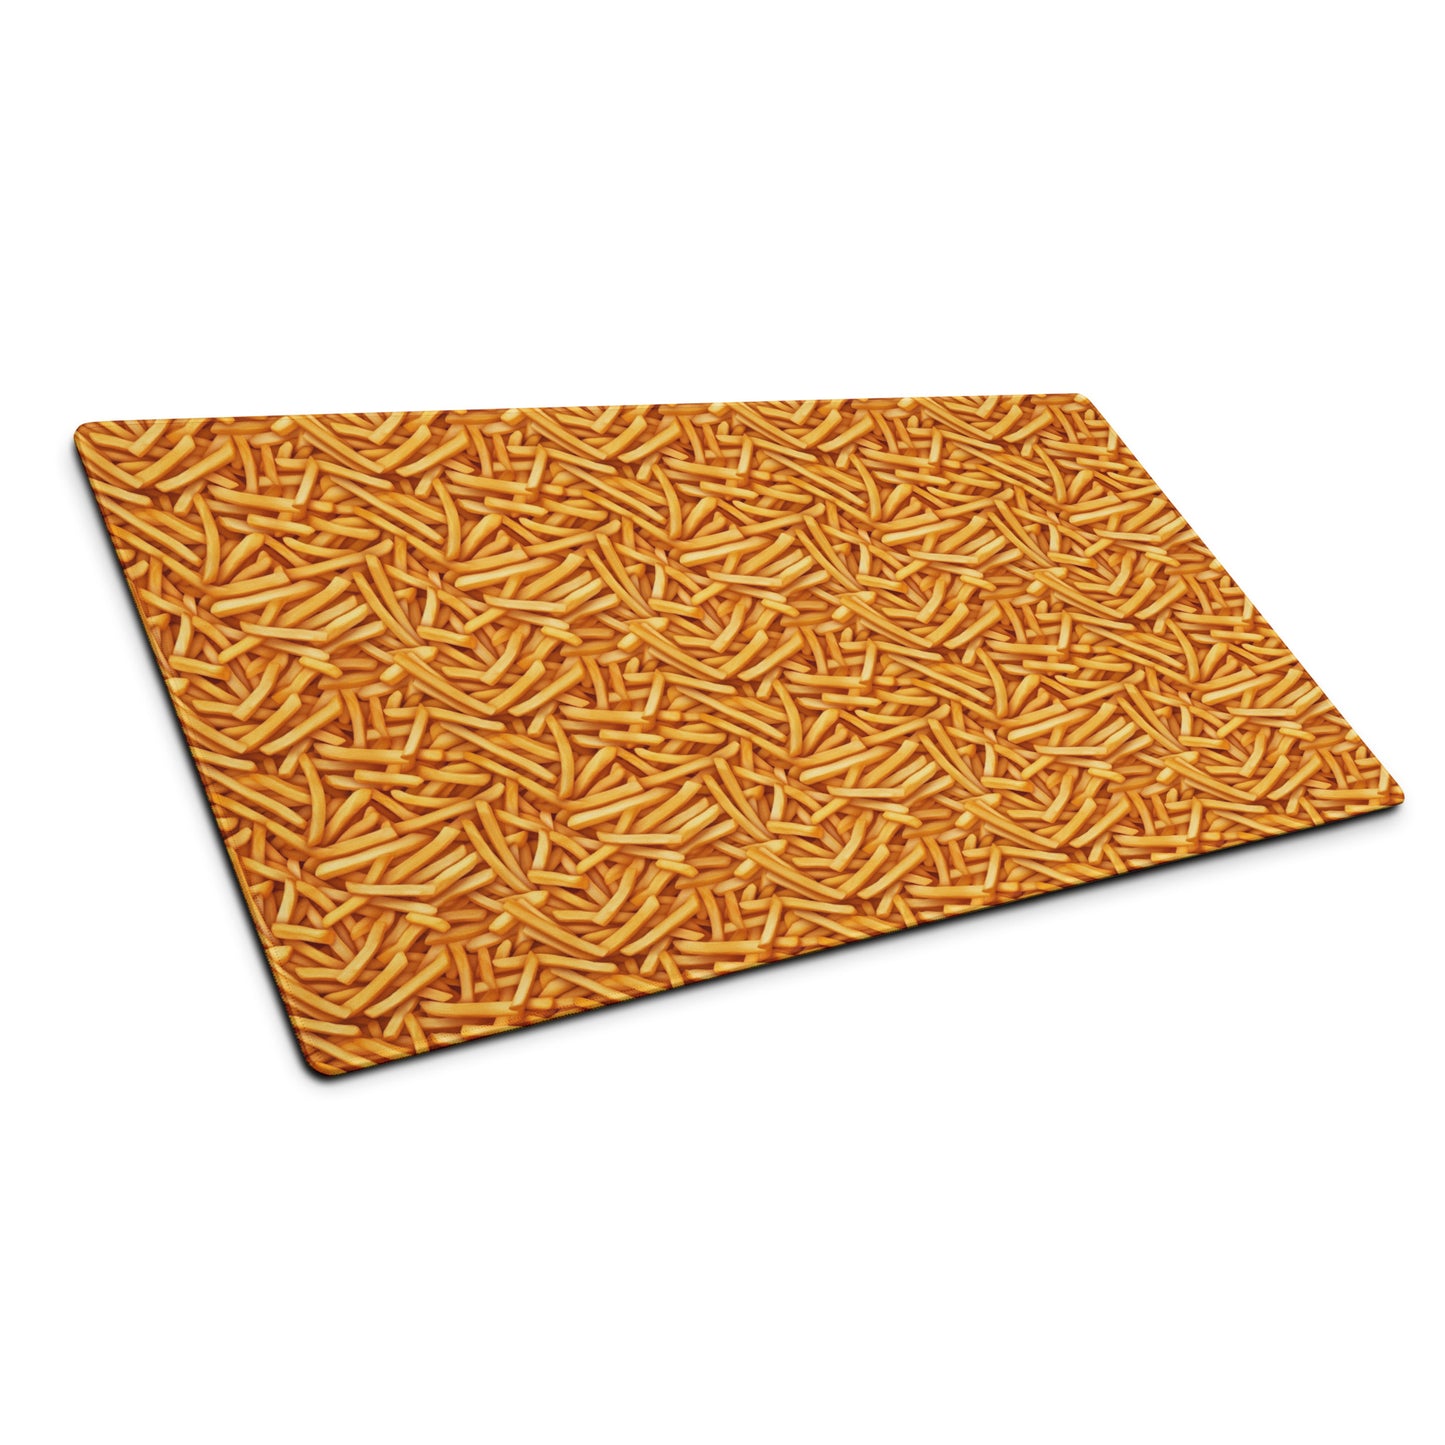 A 36" x 18" desk pad with a bunch of french fries all over it shown at an angle. Yellow in color.